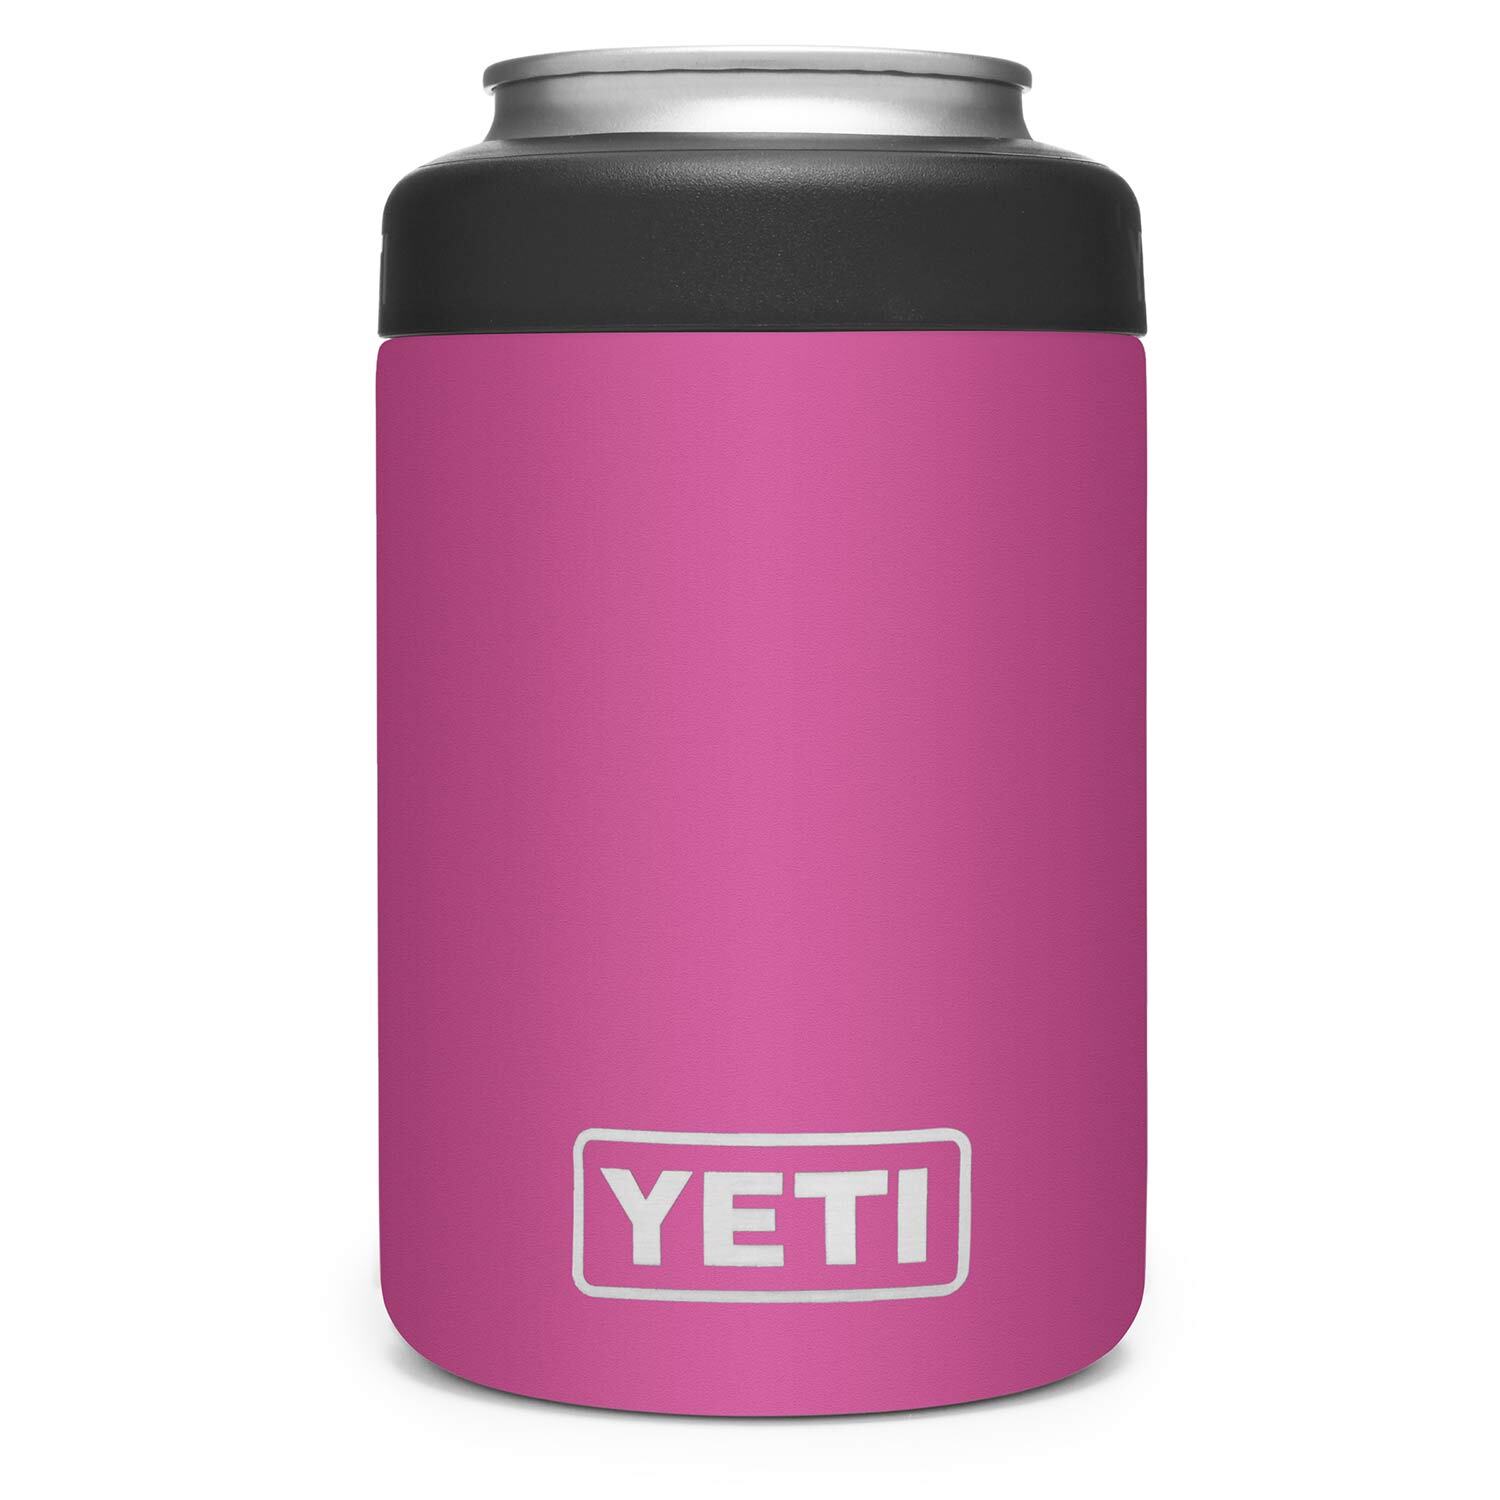 Gene Lockwood's - Little Rock - NEW @yeti Bimini Pink and Offshore Blue  ramblers, colsters, and more! 🤩🤩 #shoplocal #shopgenelockwoods #shopsmall  #supportlocal #arkansas #yeti #spring #drinkware #summer #accessories